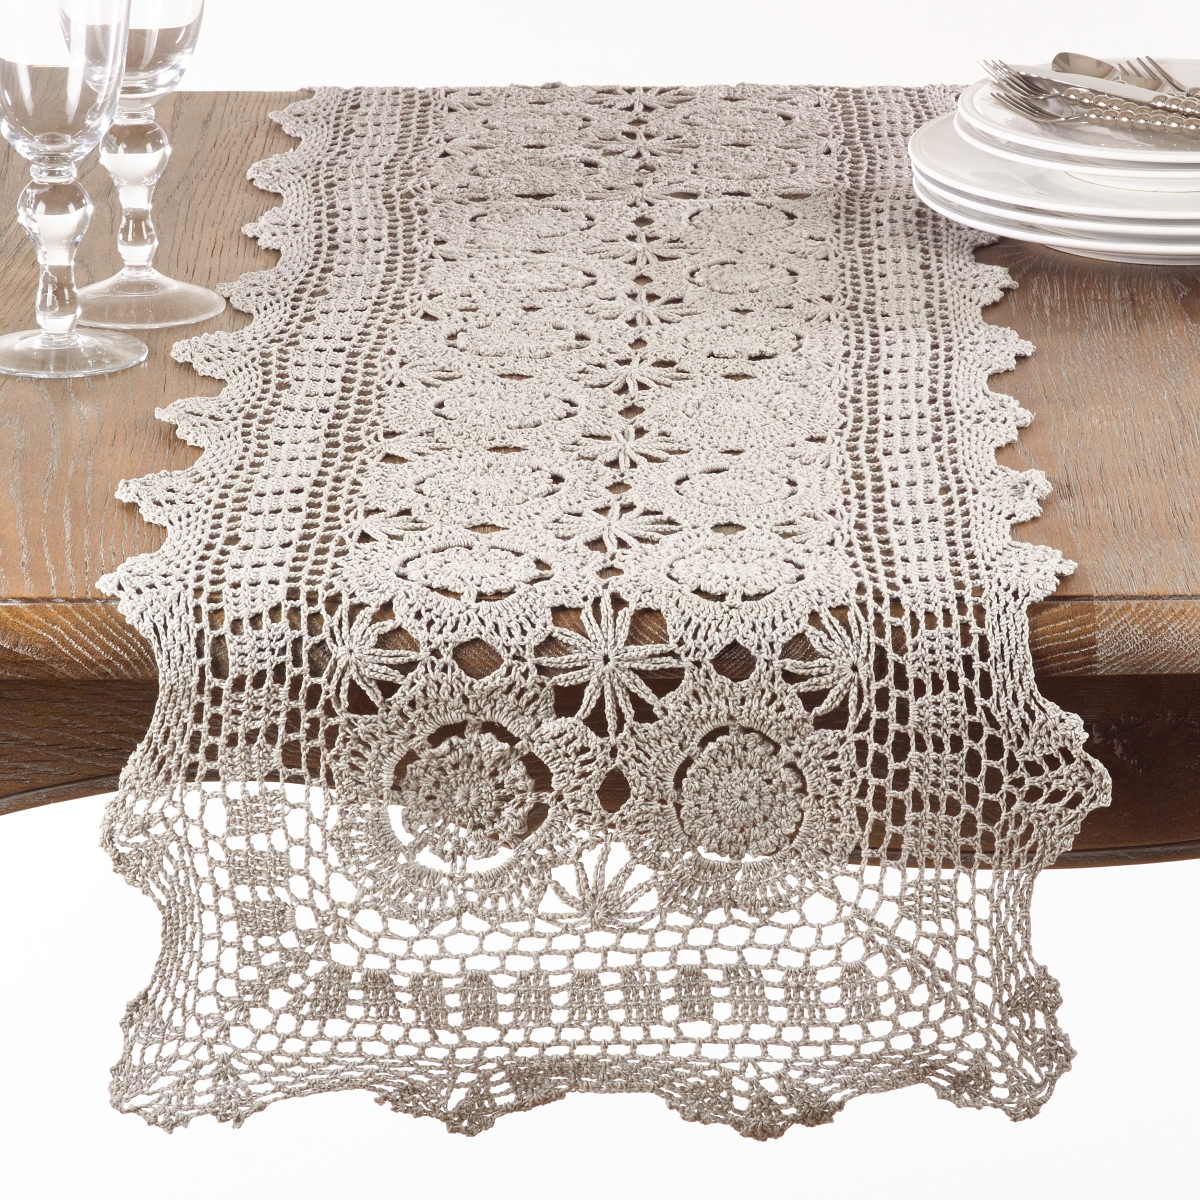 869.gy1672b 16 X 72 In. Rectangular Handmade Crochet Cotton Lace Table Linens - Grey